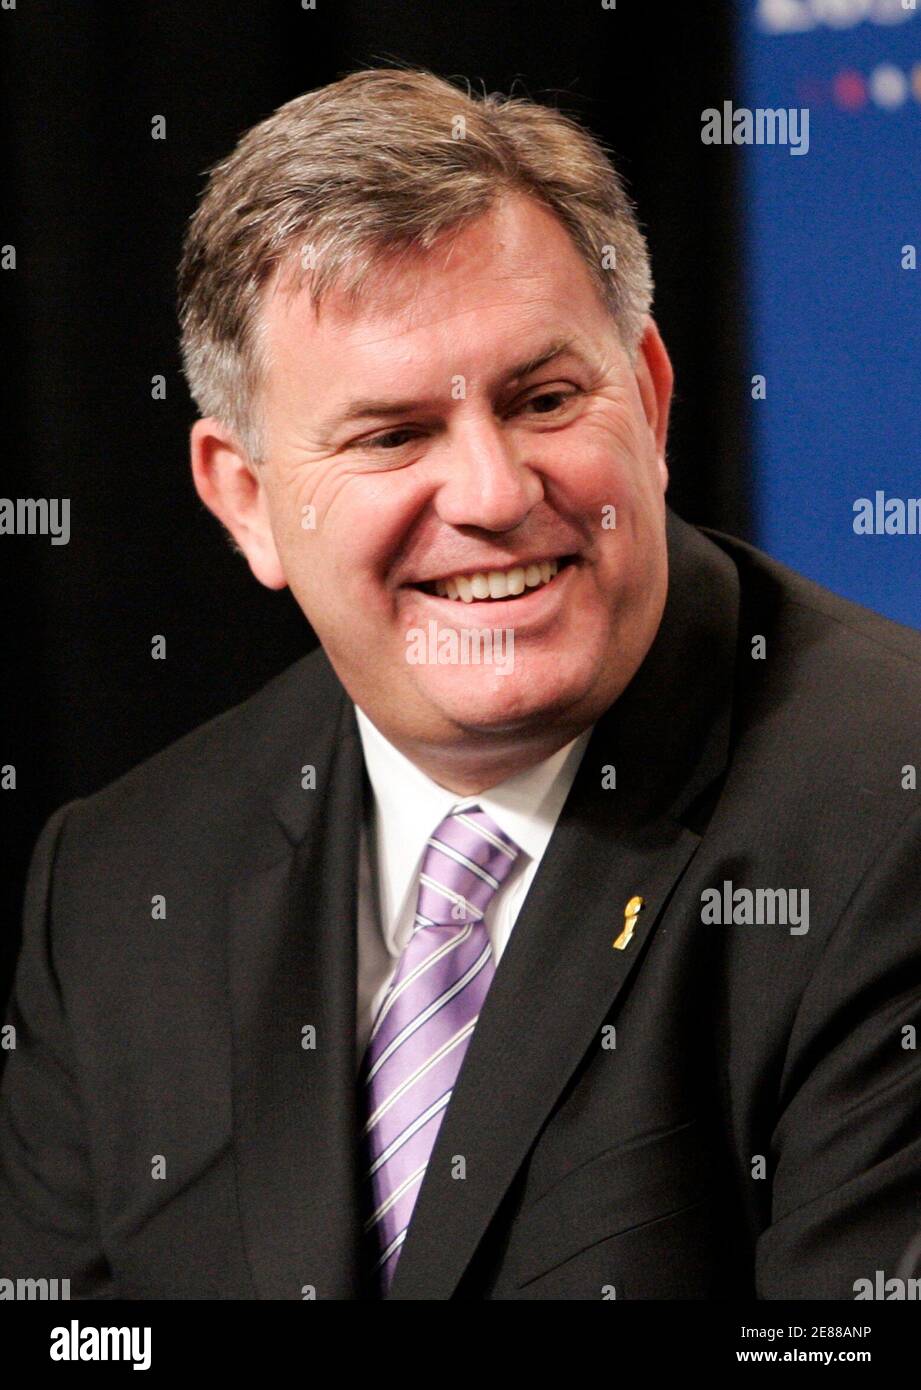 Timothy J. Leiweke, President & CEO of Anschutz Entertainment Group (AEG), attends a news conference to announce 2011 NBA All Star Game to be held in Los Angeles before Game 2 of their NBA Finals basketball game between the Los Angeles Lakers and Orlando Magic in Los Angeles, June 7, 2009. REUTERS/Danny Moloshok (UNITED STATES SPORT BASKETBALL) Stock Photo